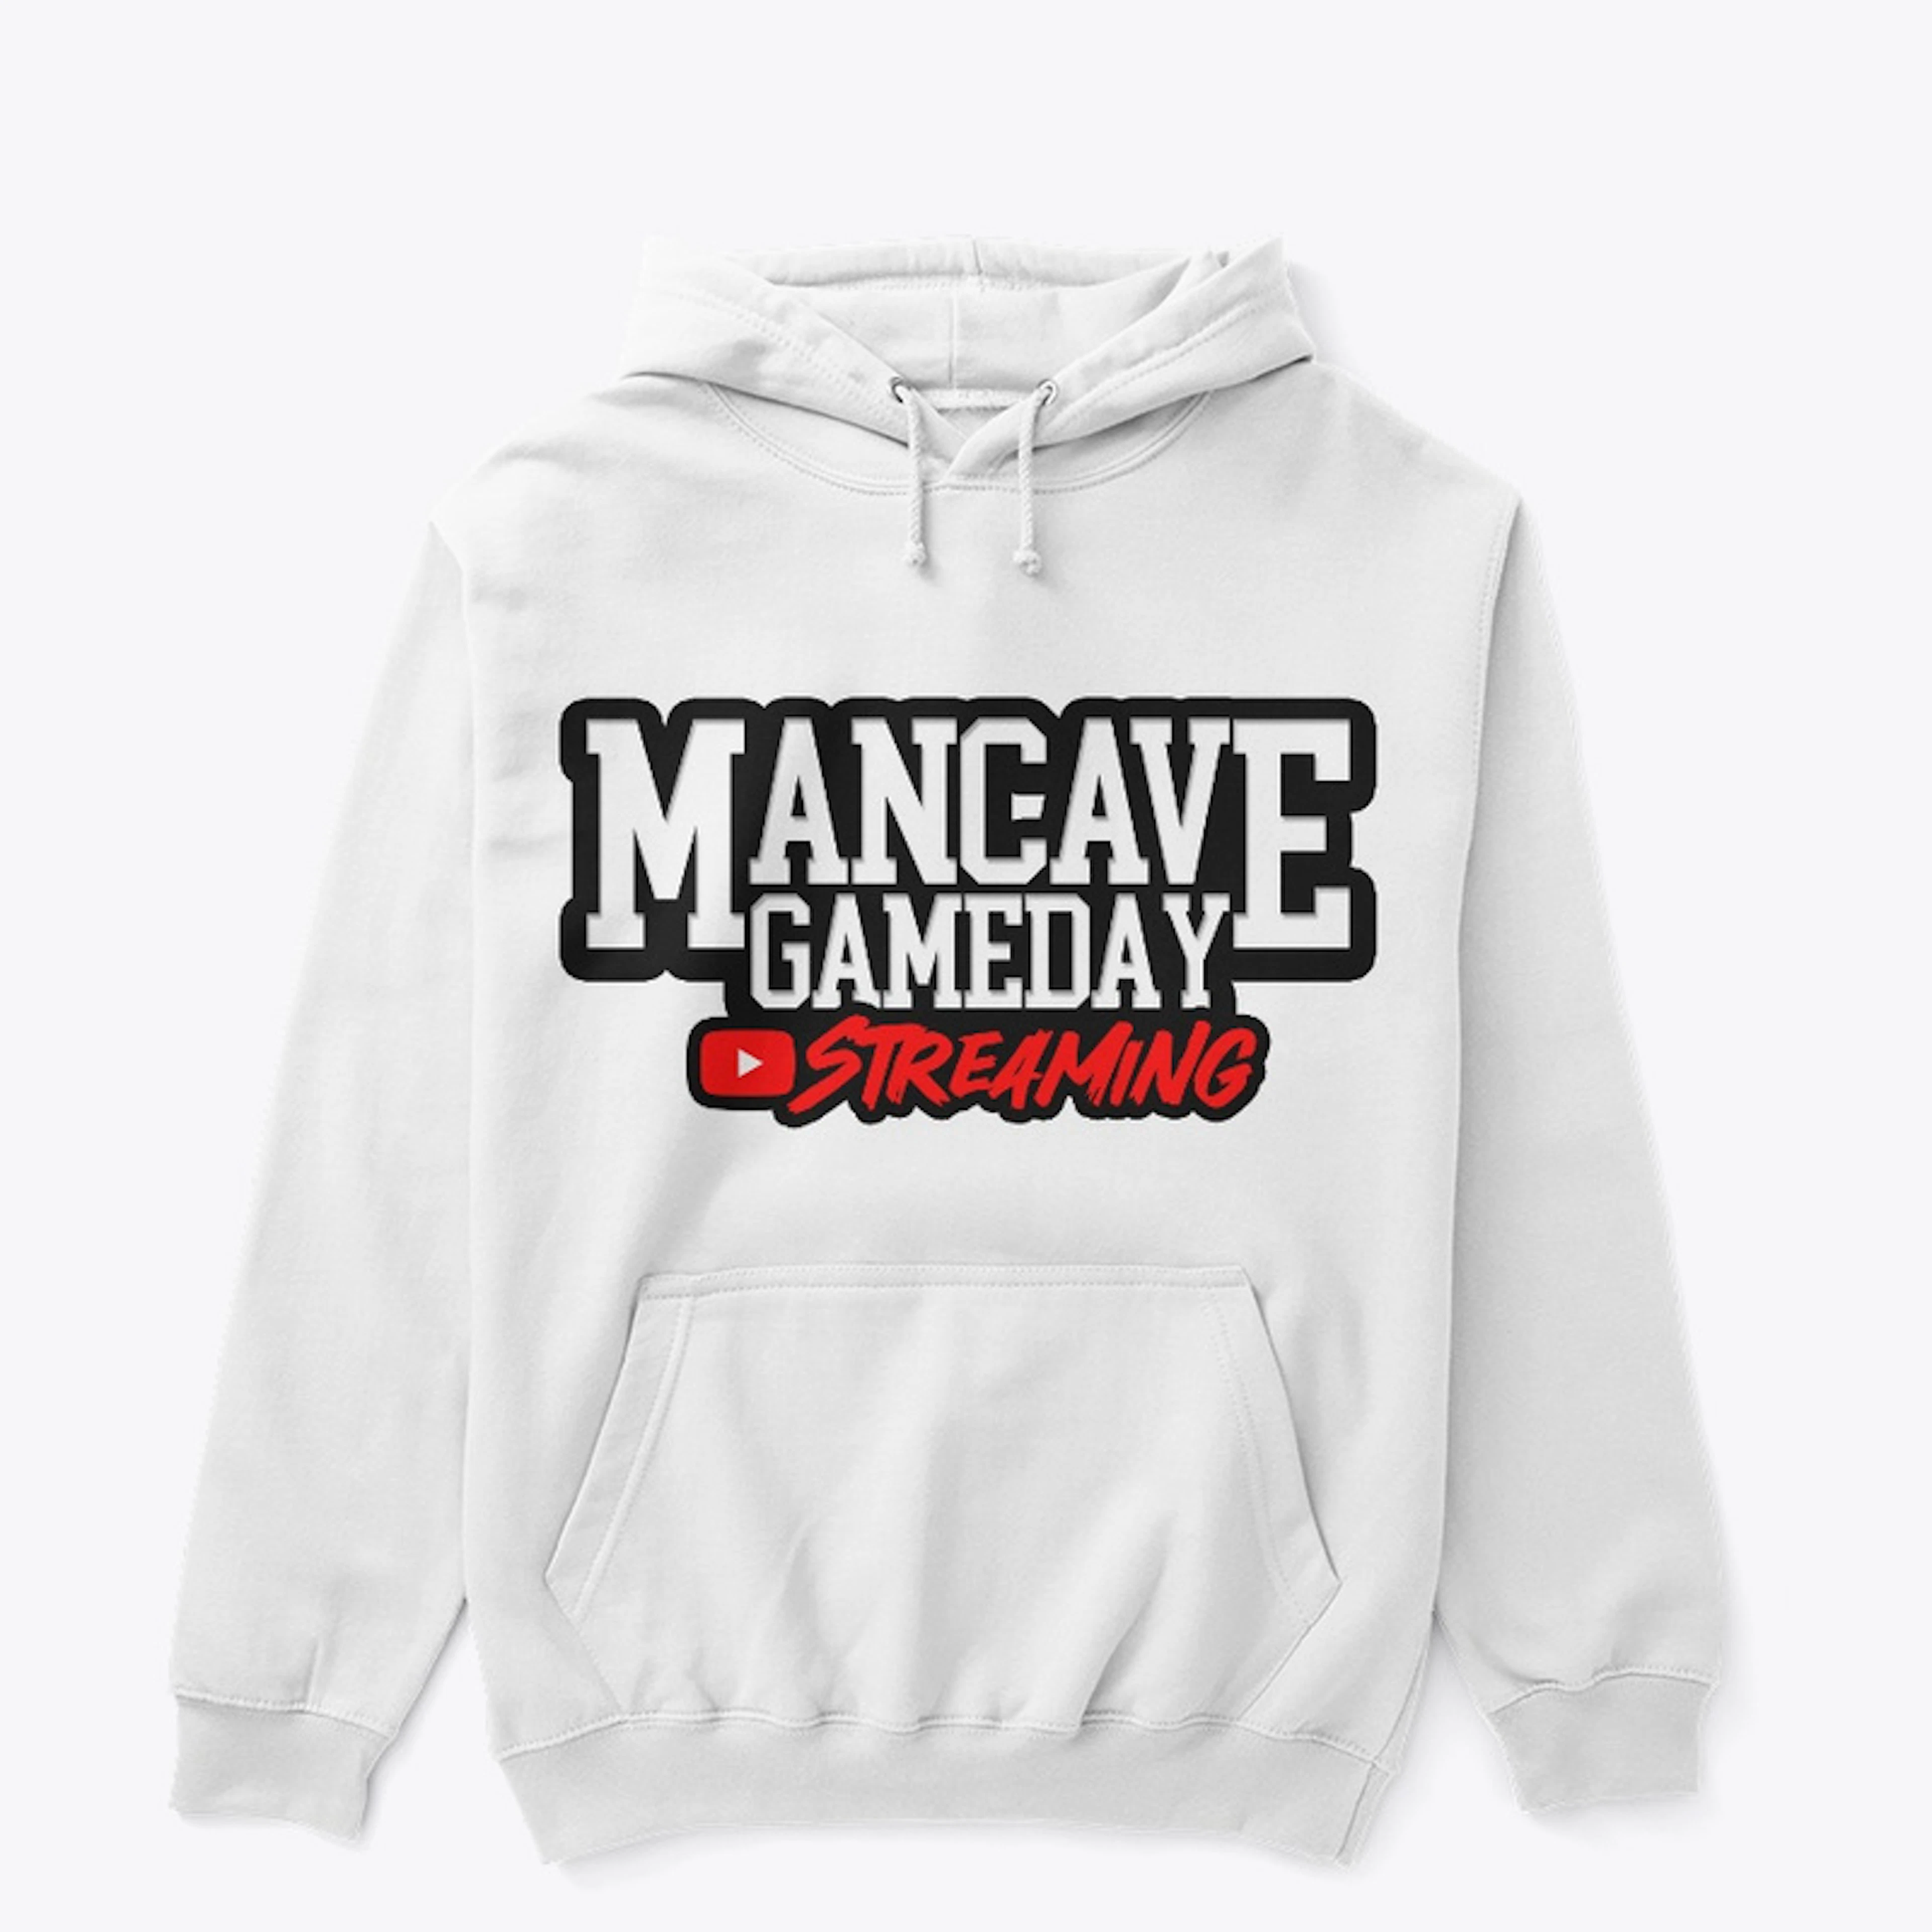 THE MANCAVE GAMEDAY STREAMING 